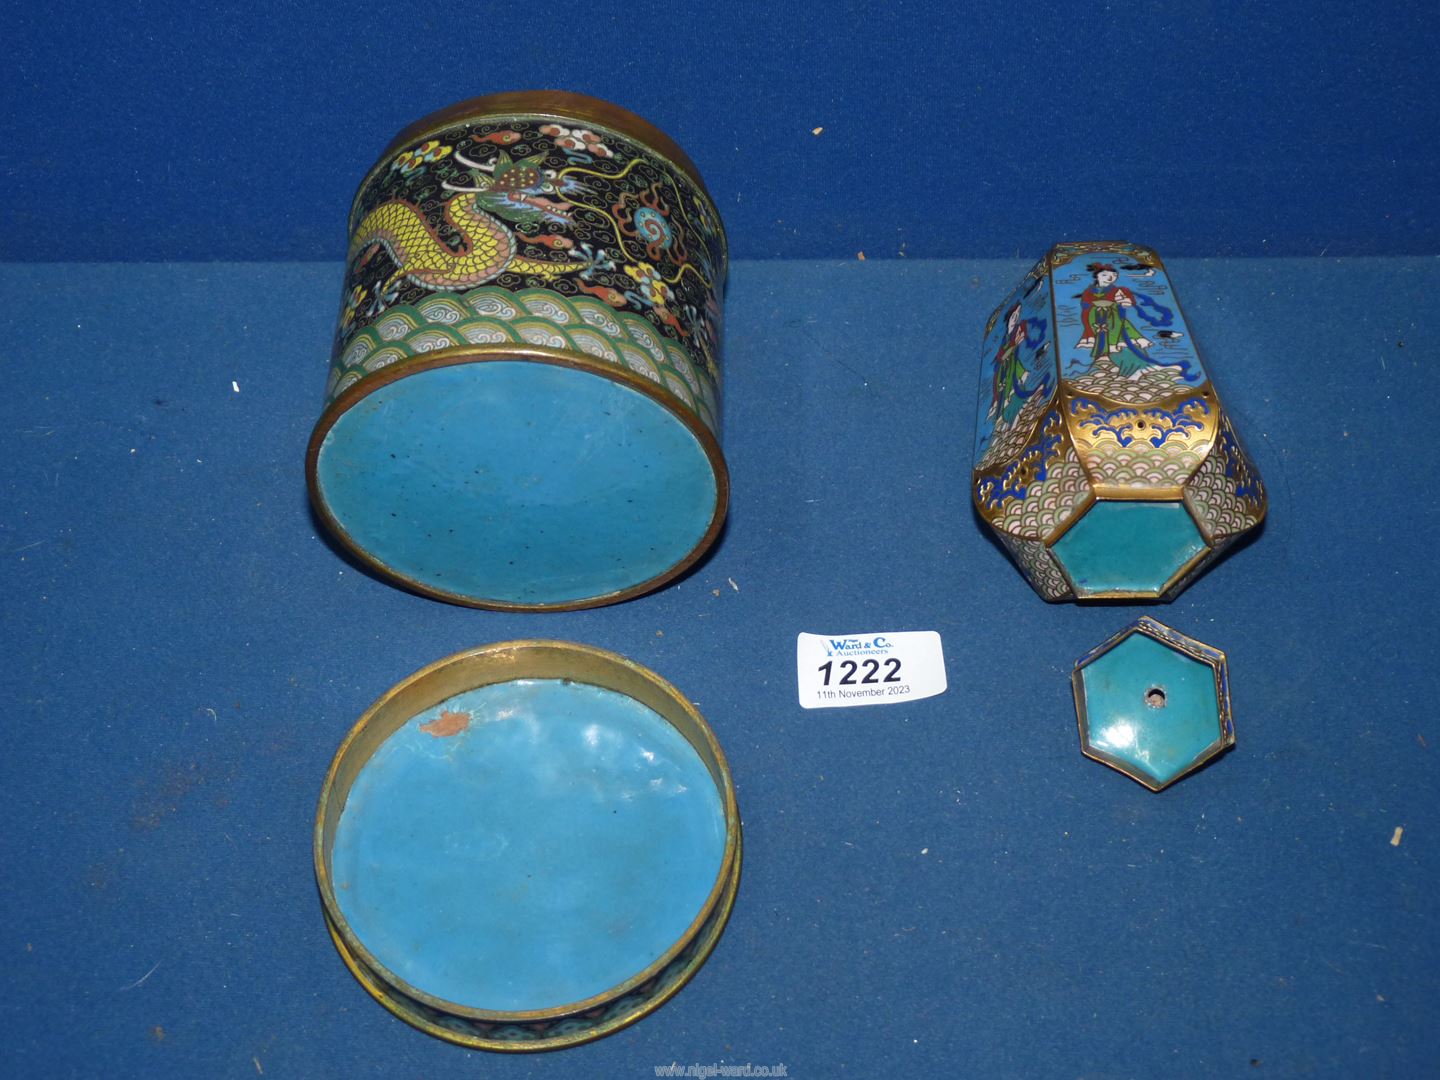 A Chinese, Cloisonne enamel copper box with dragon design, - Image 3 of 3